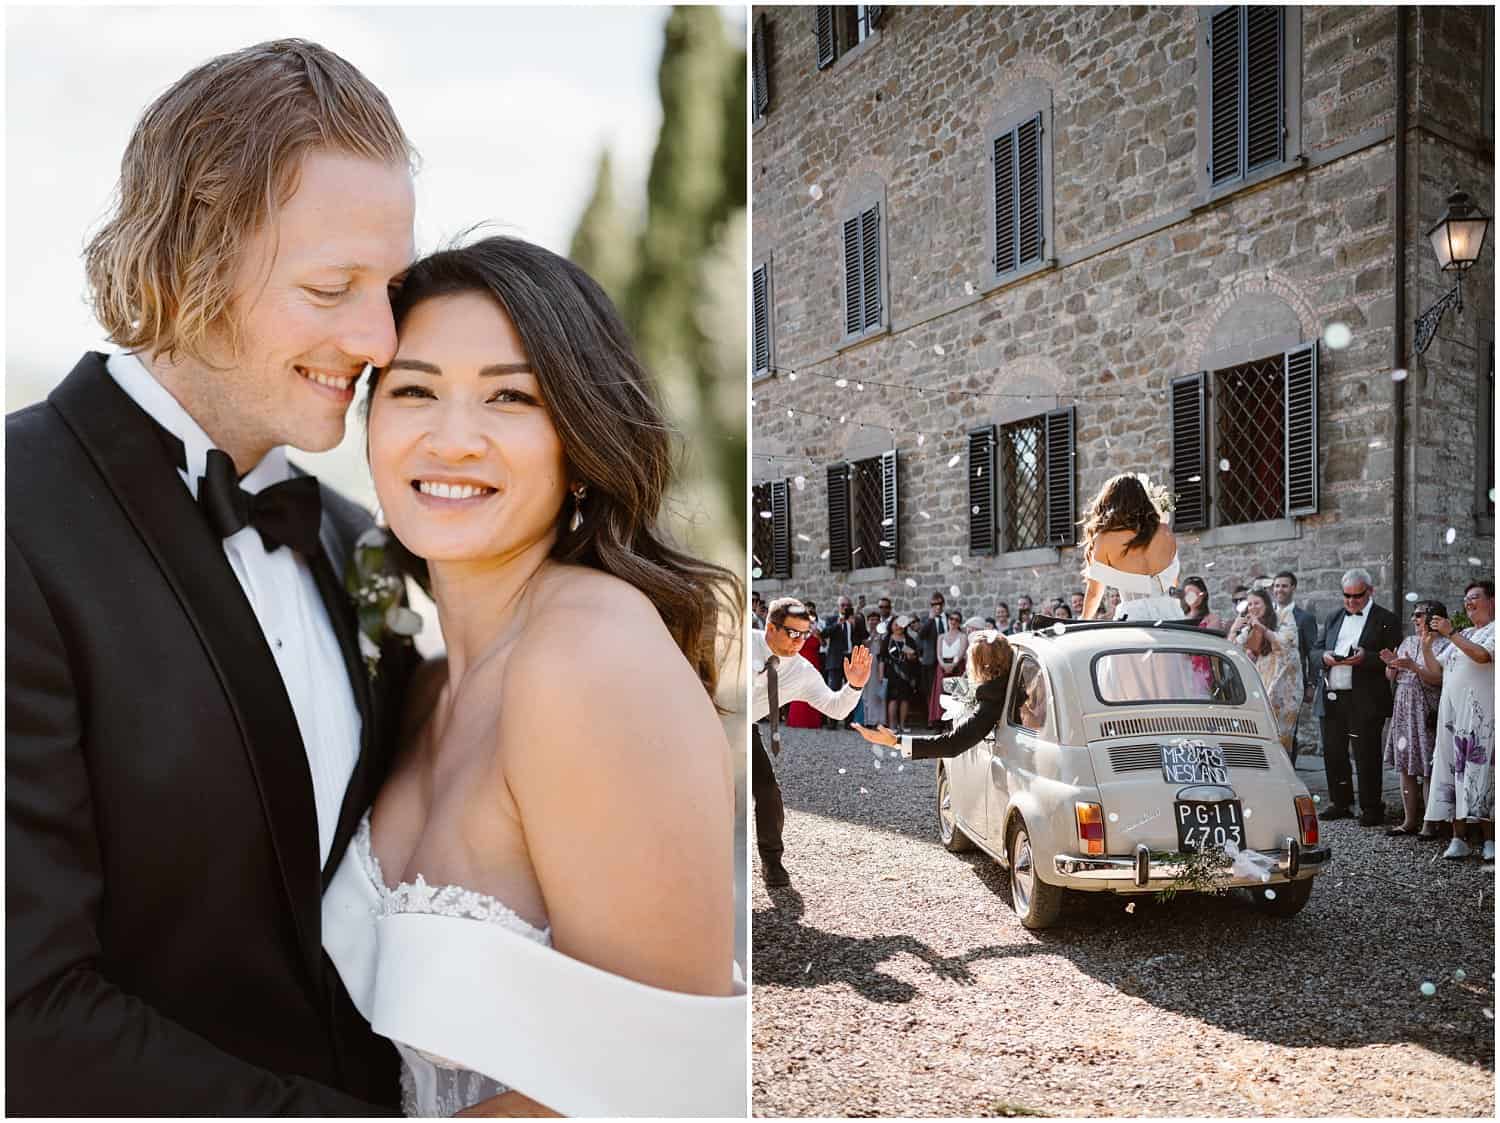 bride and groom riding a vintage fiat 500 at their wedding in Tuscany